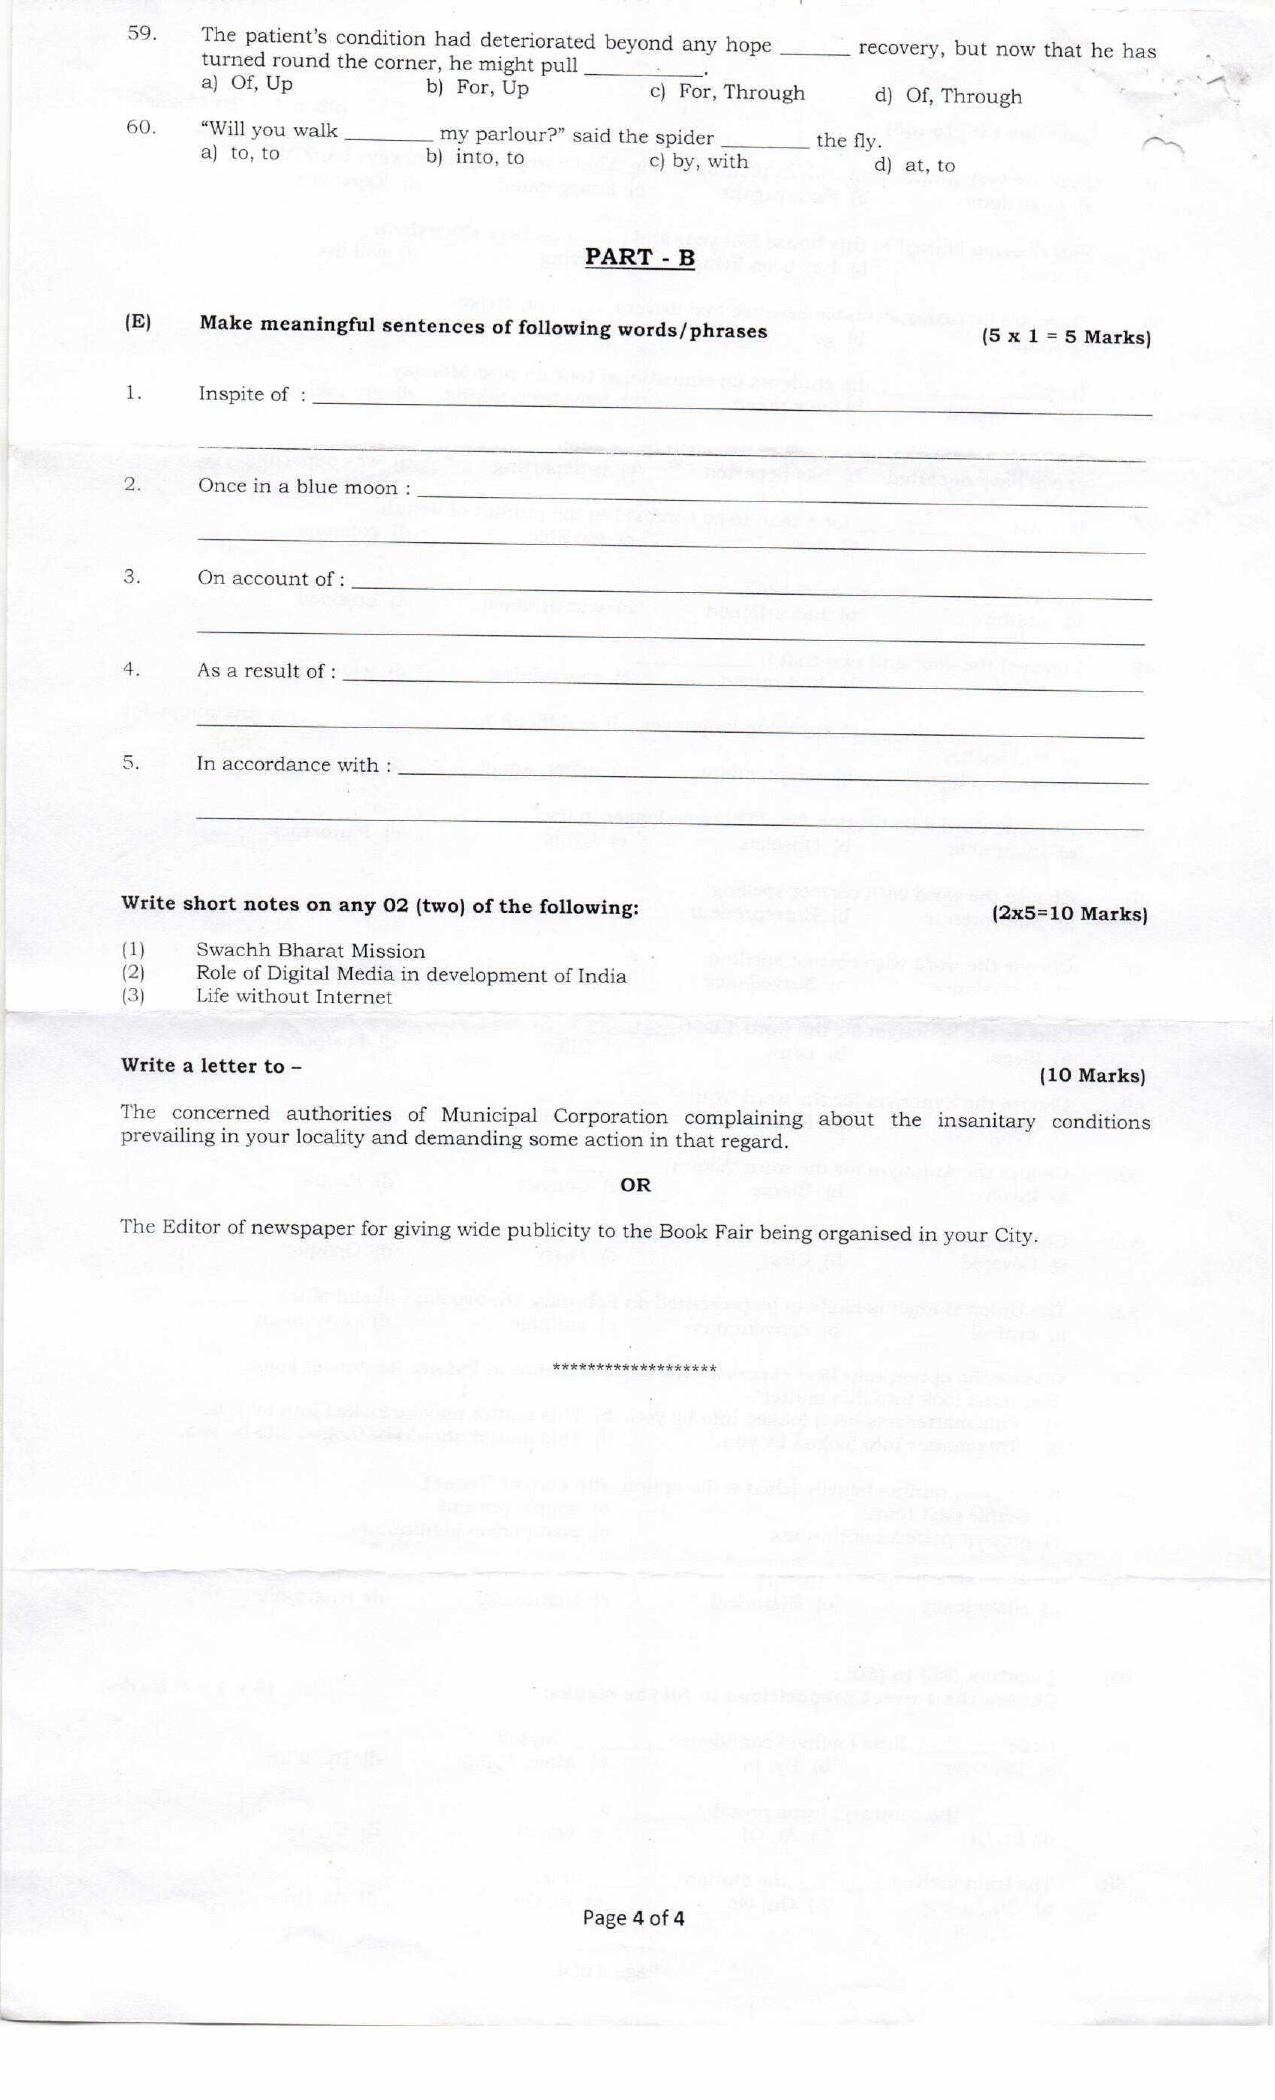 Question Paper of Office Assistant Gr. III (Advertisement No. 4/2018) - Page 4